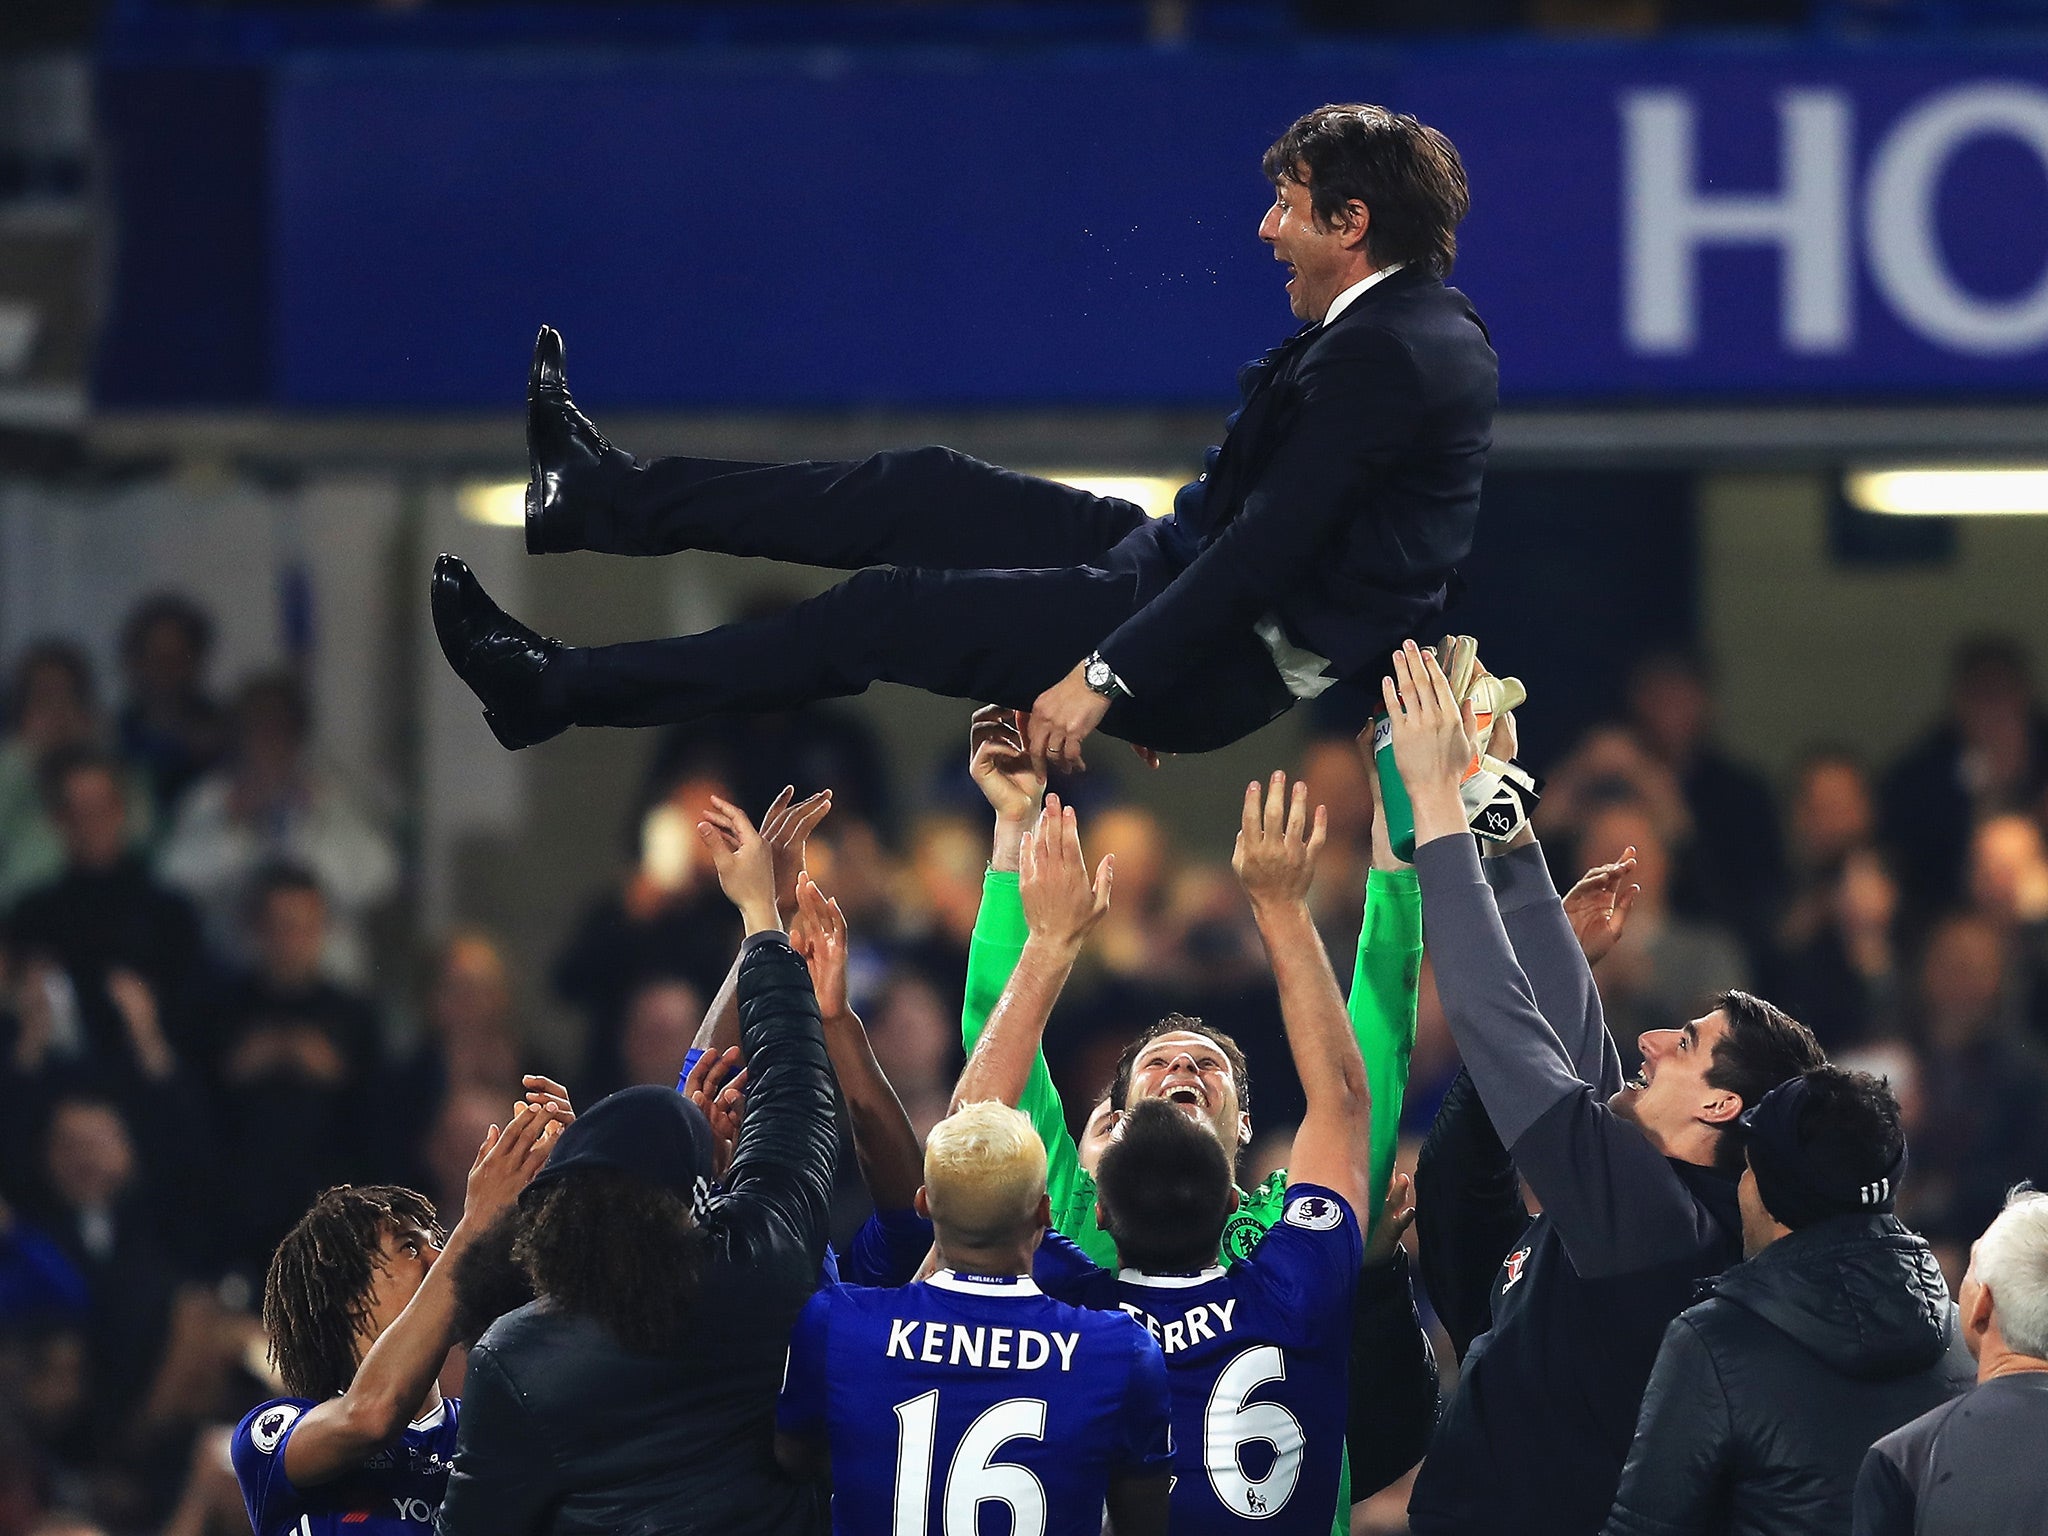 Antonio Conte's side clinched the title last Friday against West Bromwich Albion